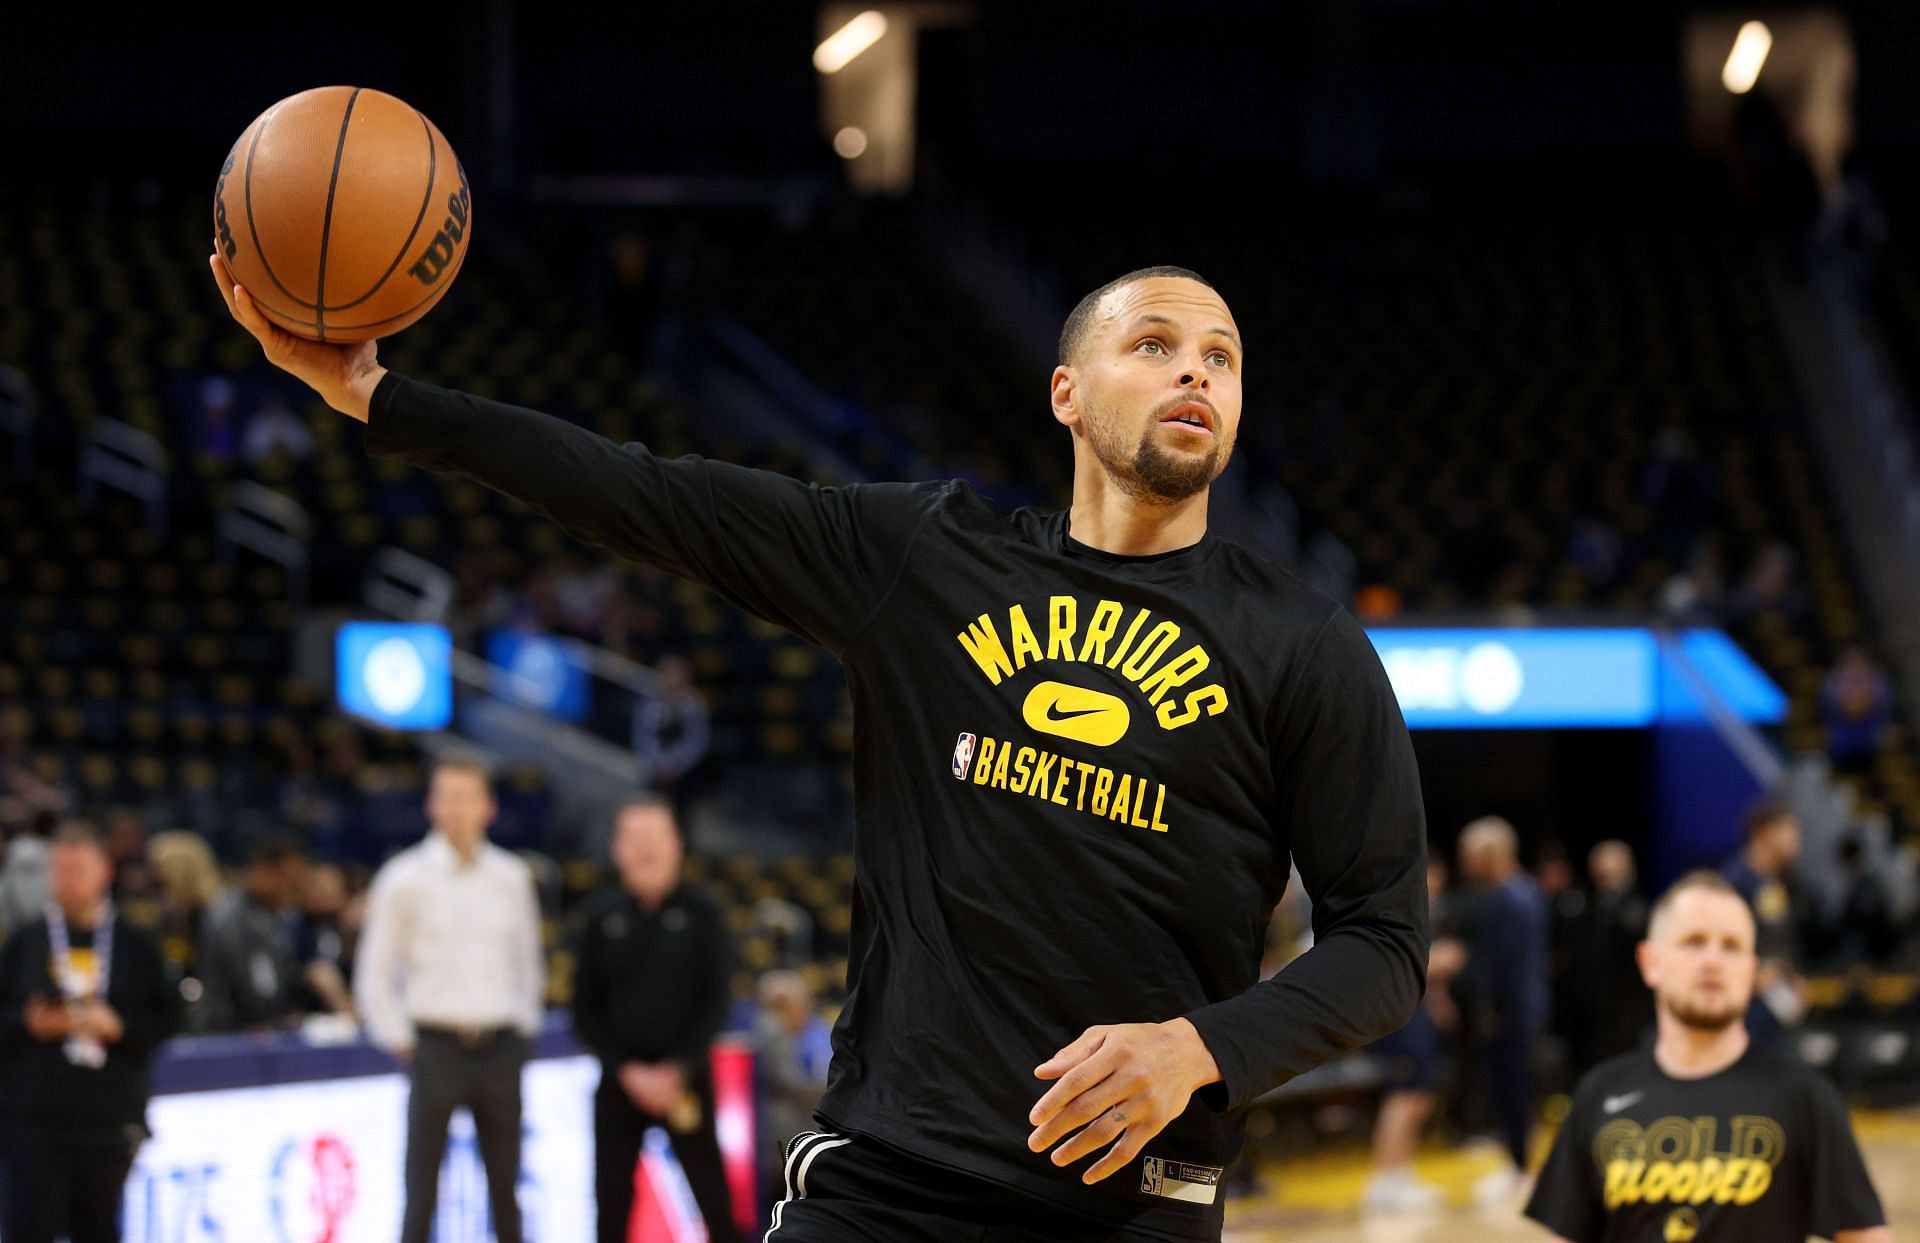 Steph Curry of the Golden State Warriors warms up before facing the Denver Nuggets in Game 1 of the first round of the 2022 NBA playoffs